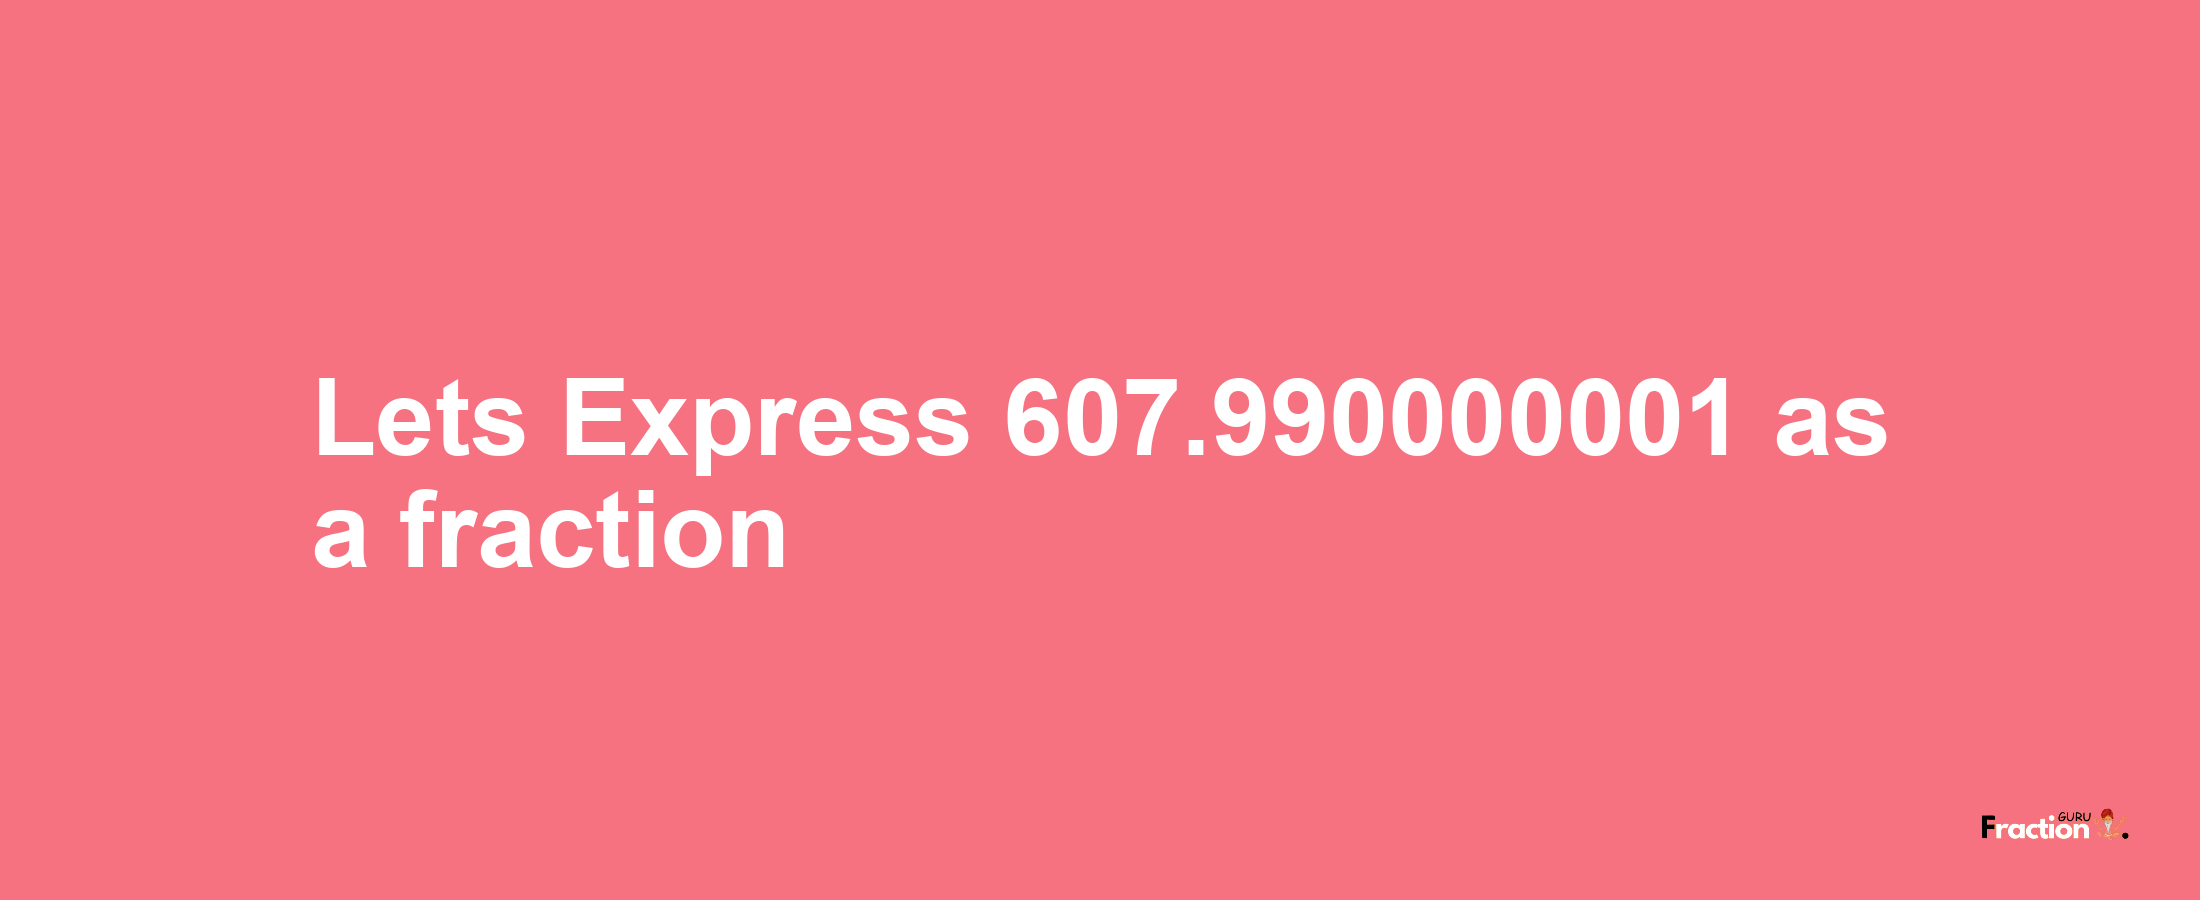 Lets Express 607.990000001 as afraction